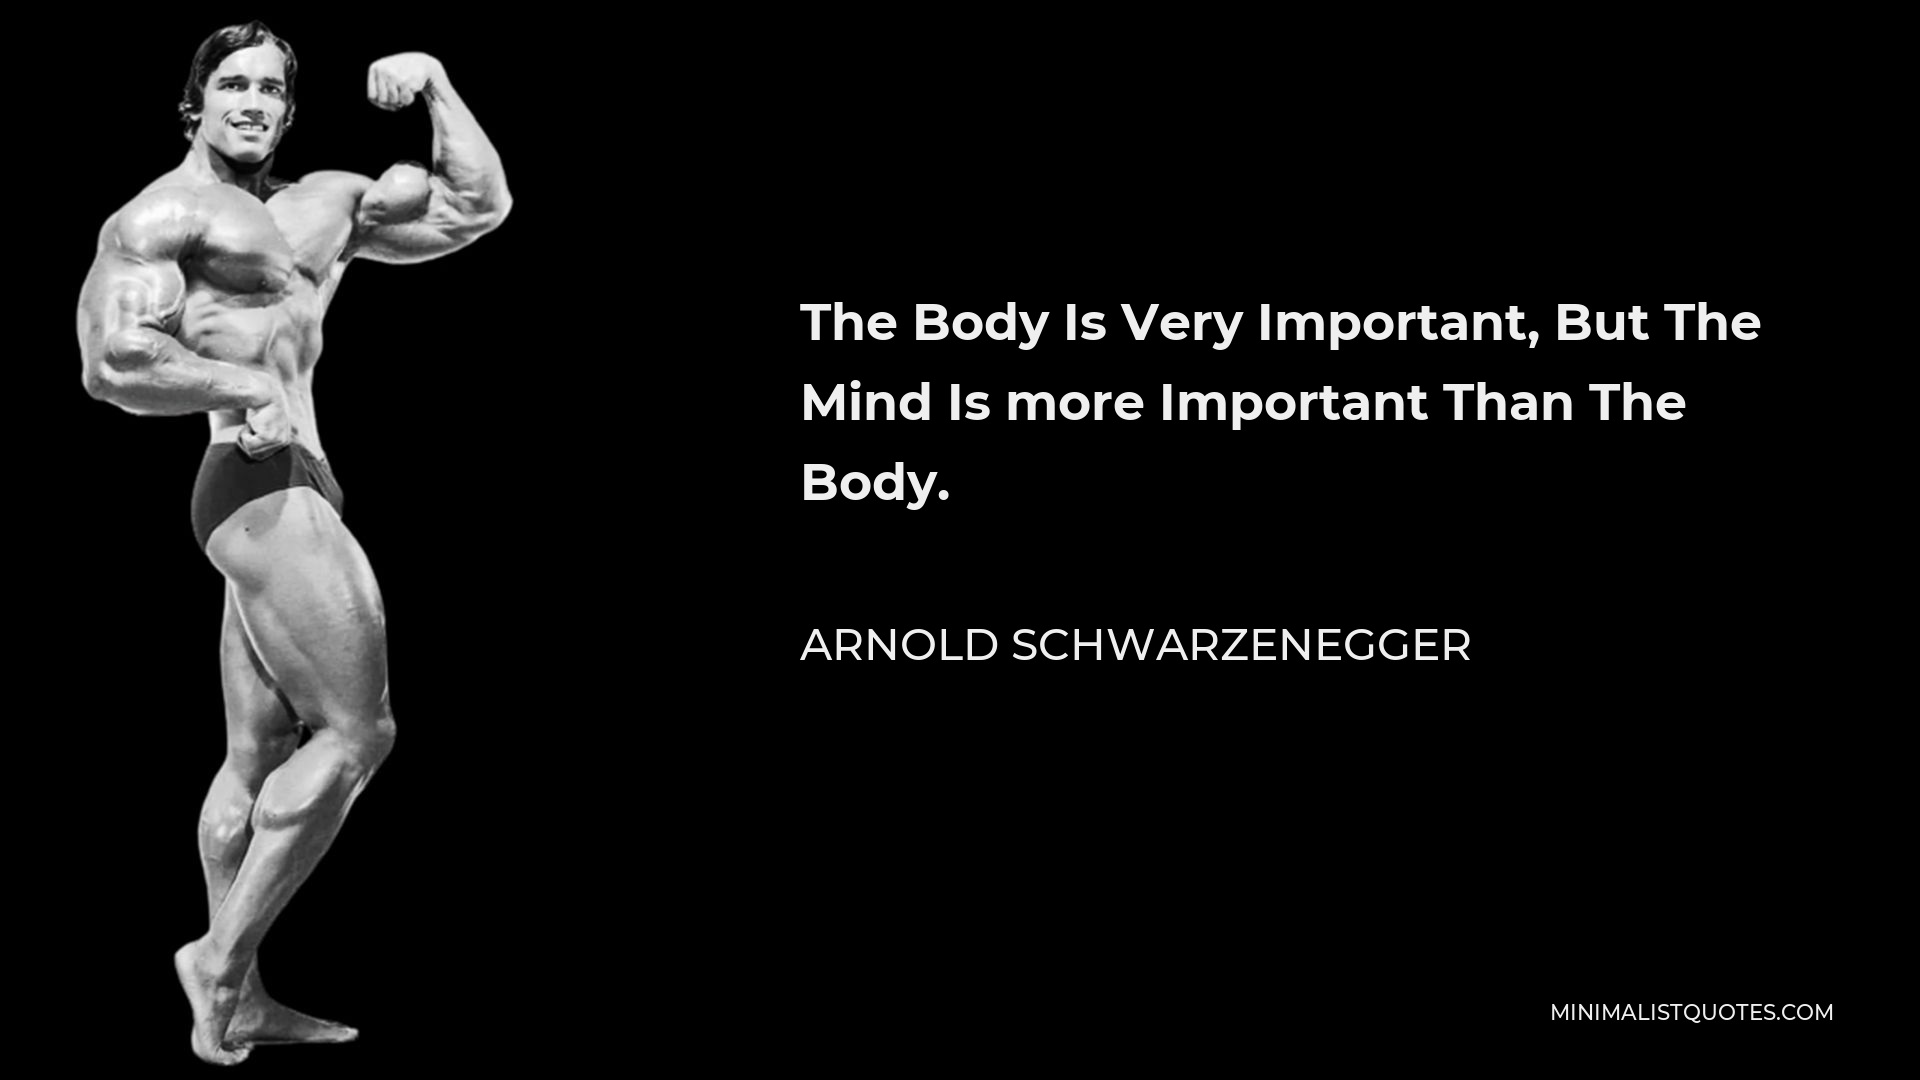 Arnold Schwarzenegger Quote - The Body Is Very Important, But The Mind Is more Important Than The Body.